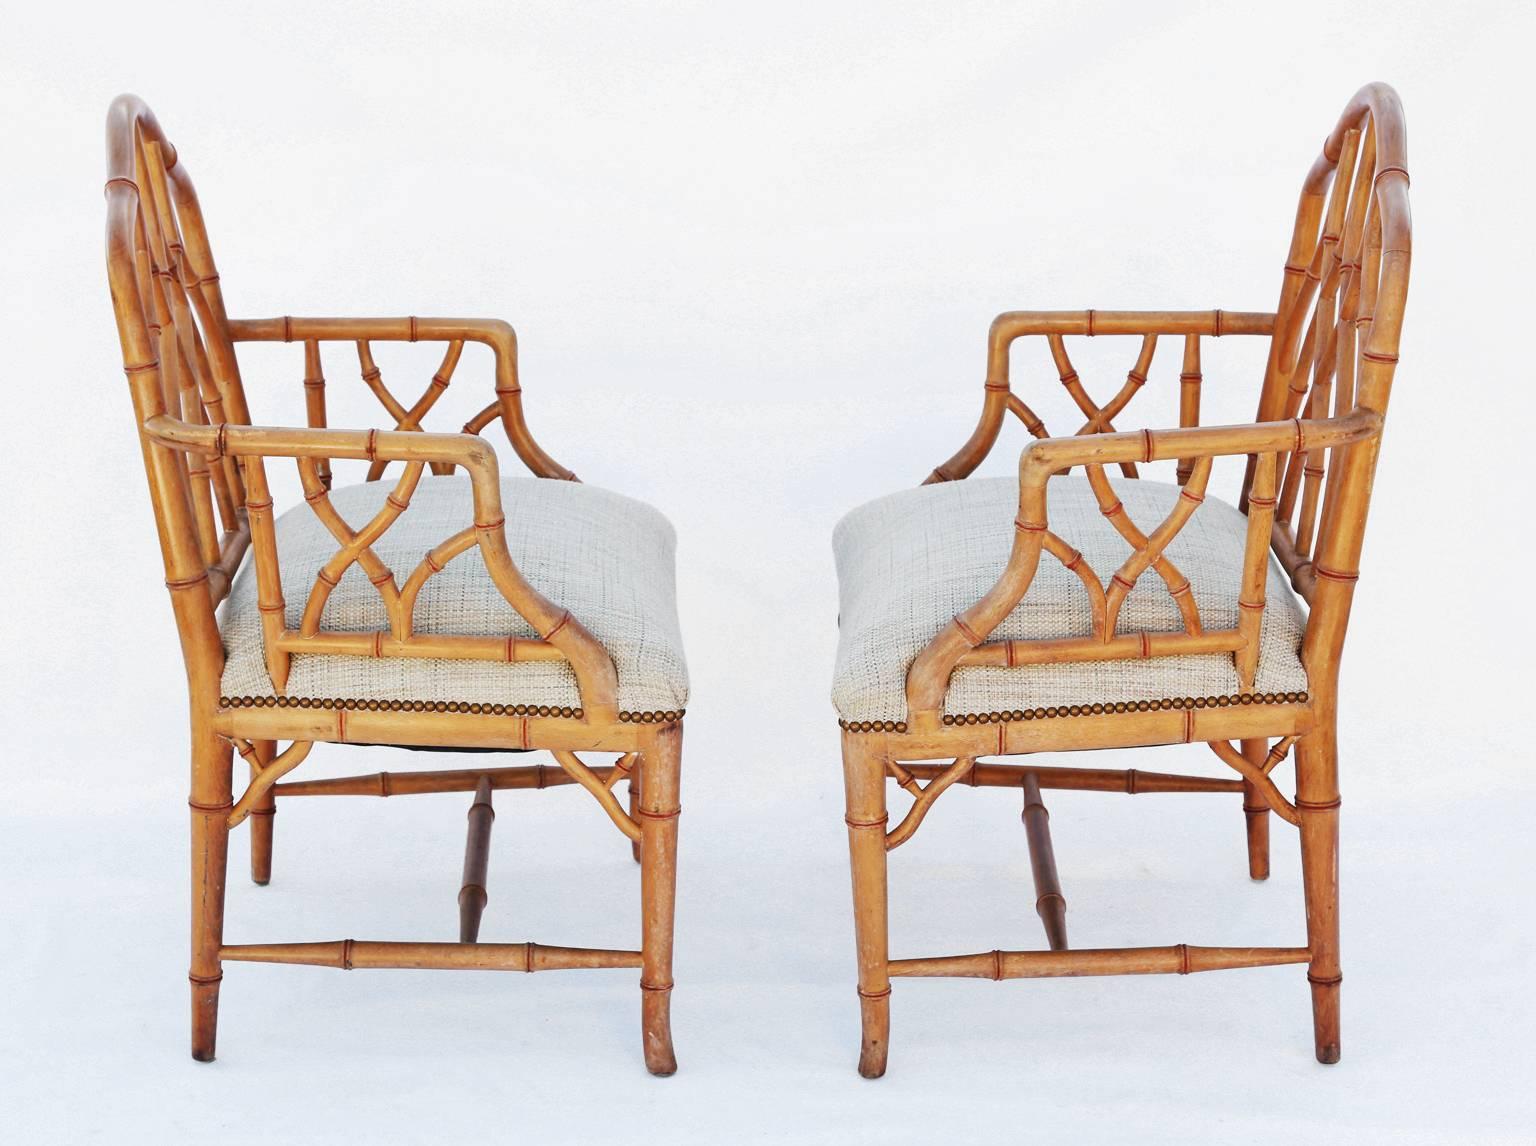 Pair of armchairs, of pine, carved as bamboo, in the Chippendale style, with a back inset with triple Gothic-arch, its crown seat upholstered with nails, flanked by outswept arms, raised on flared legs, joined by H-stretcher.

Stock ID: D3534.